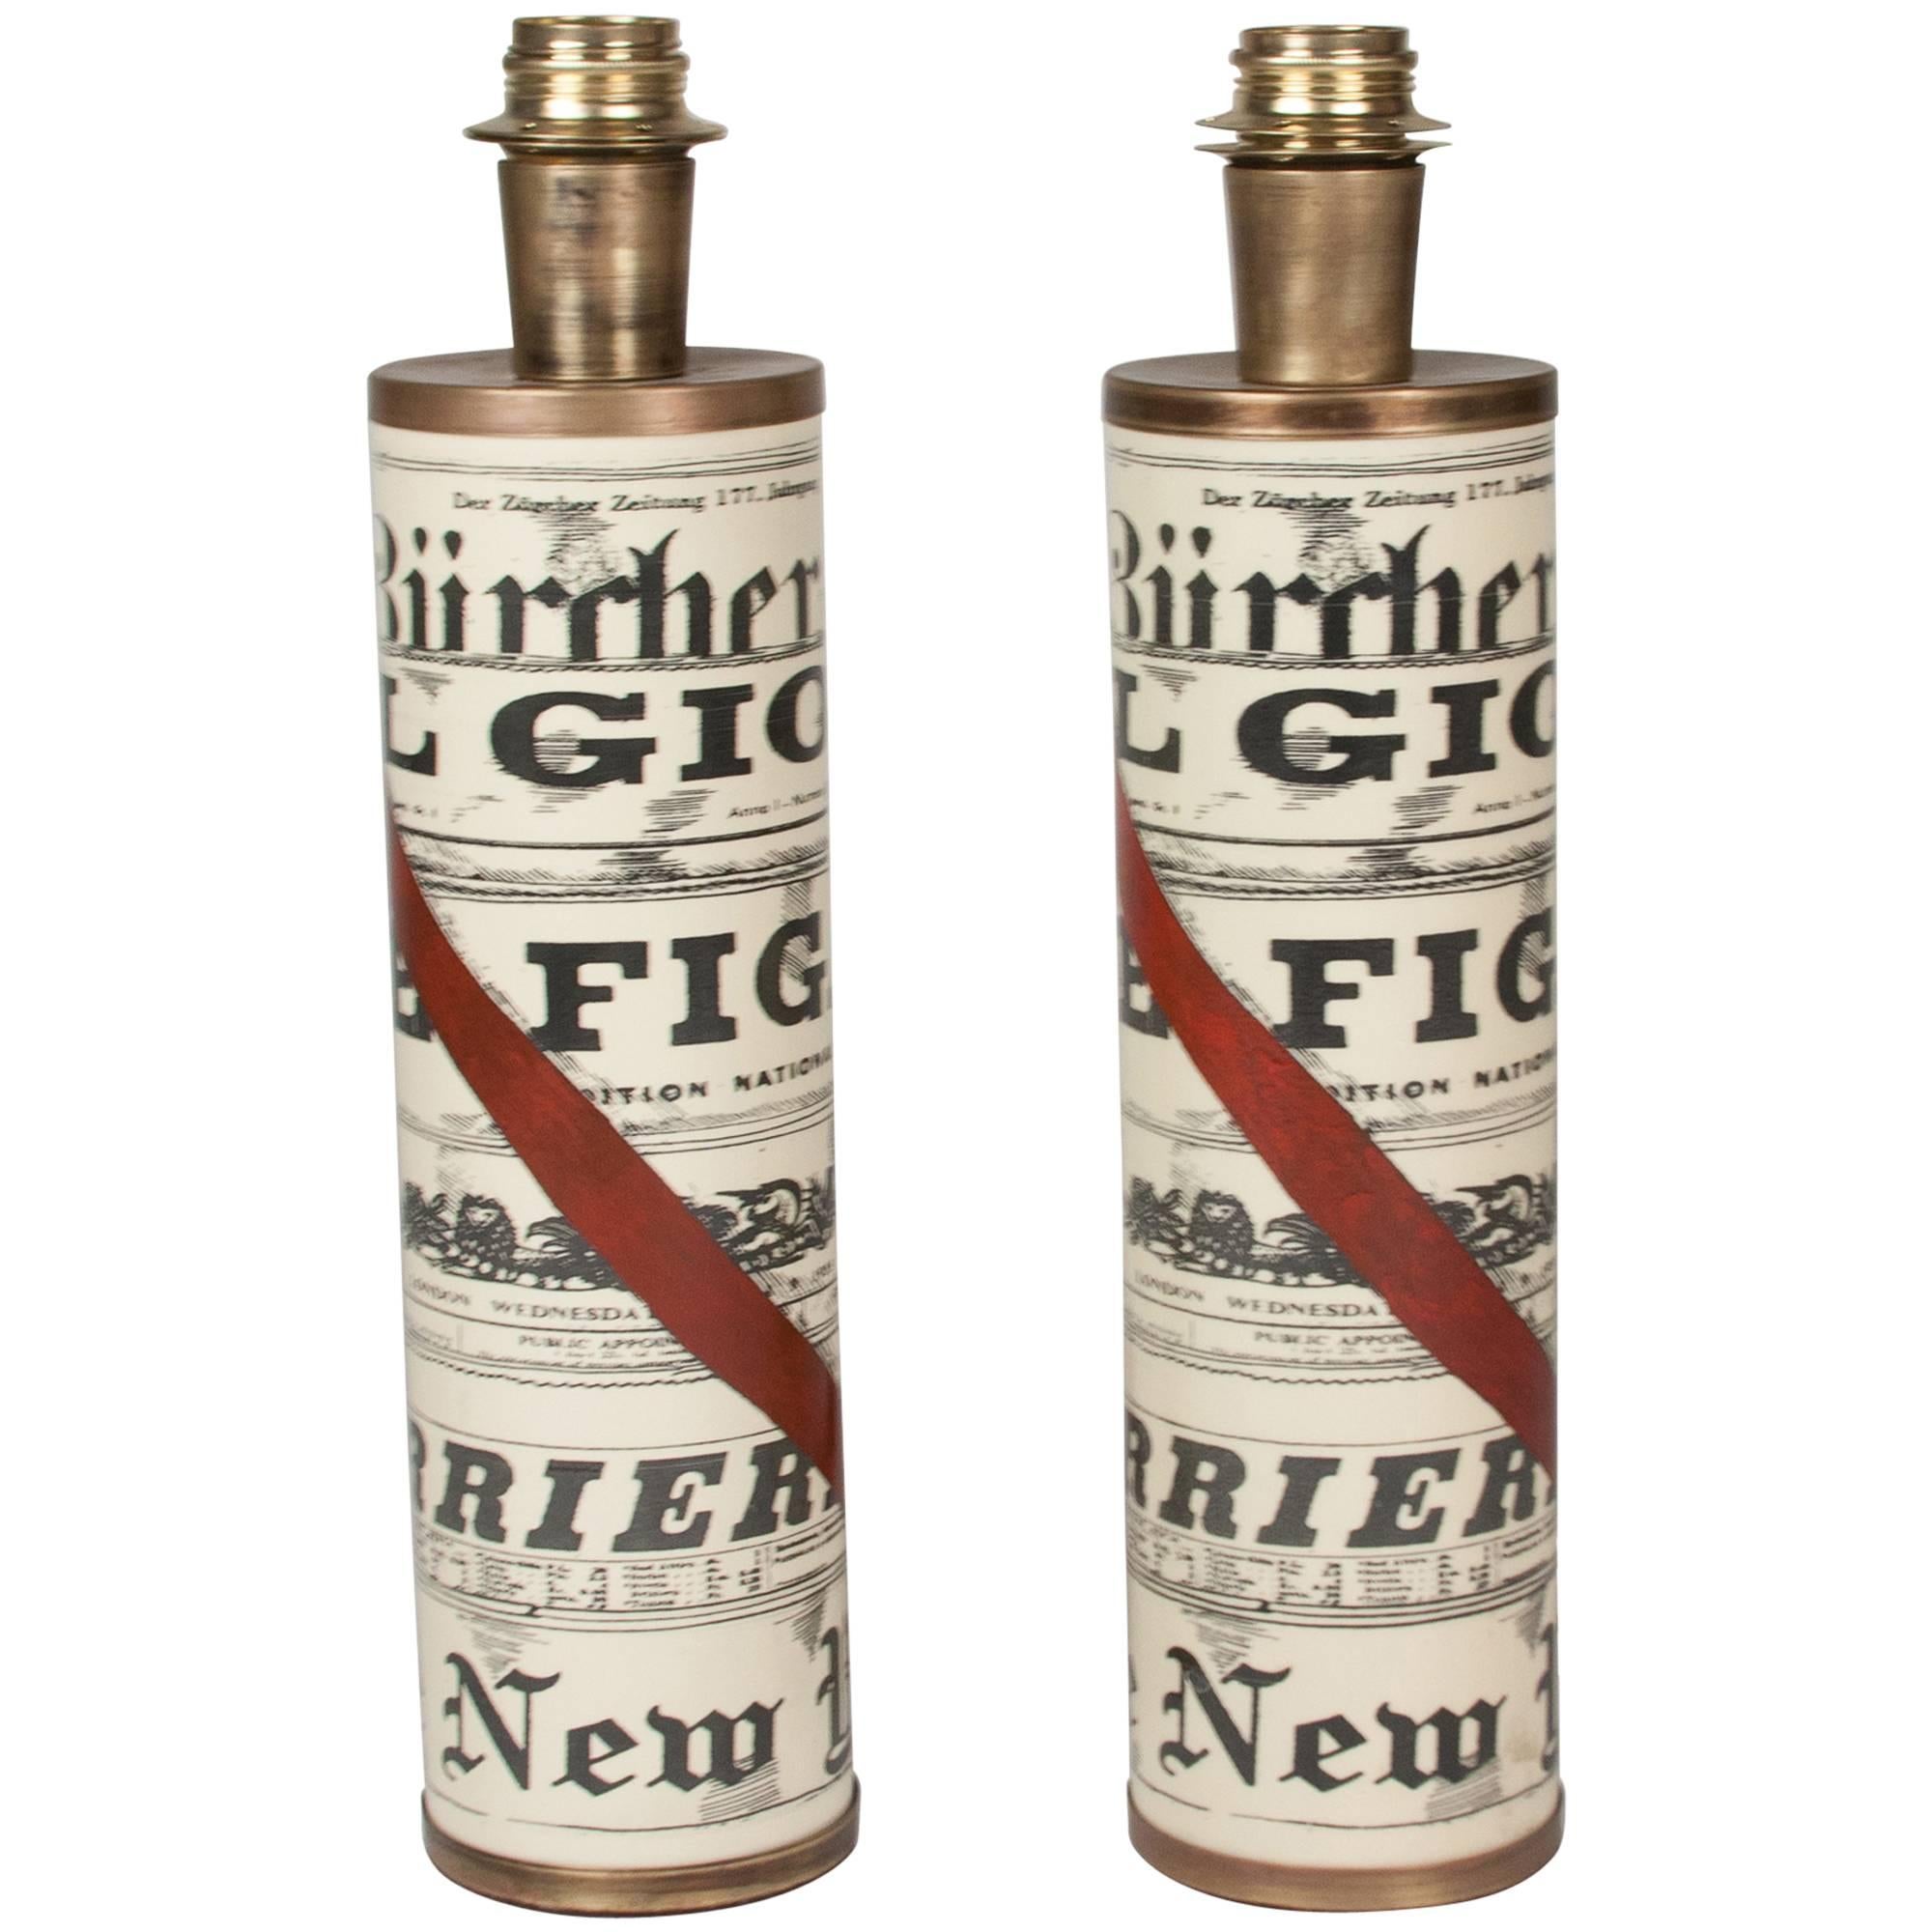 Pair of Fornasetti "Journali" Table Lamps